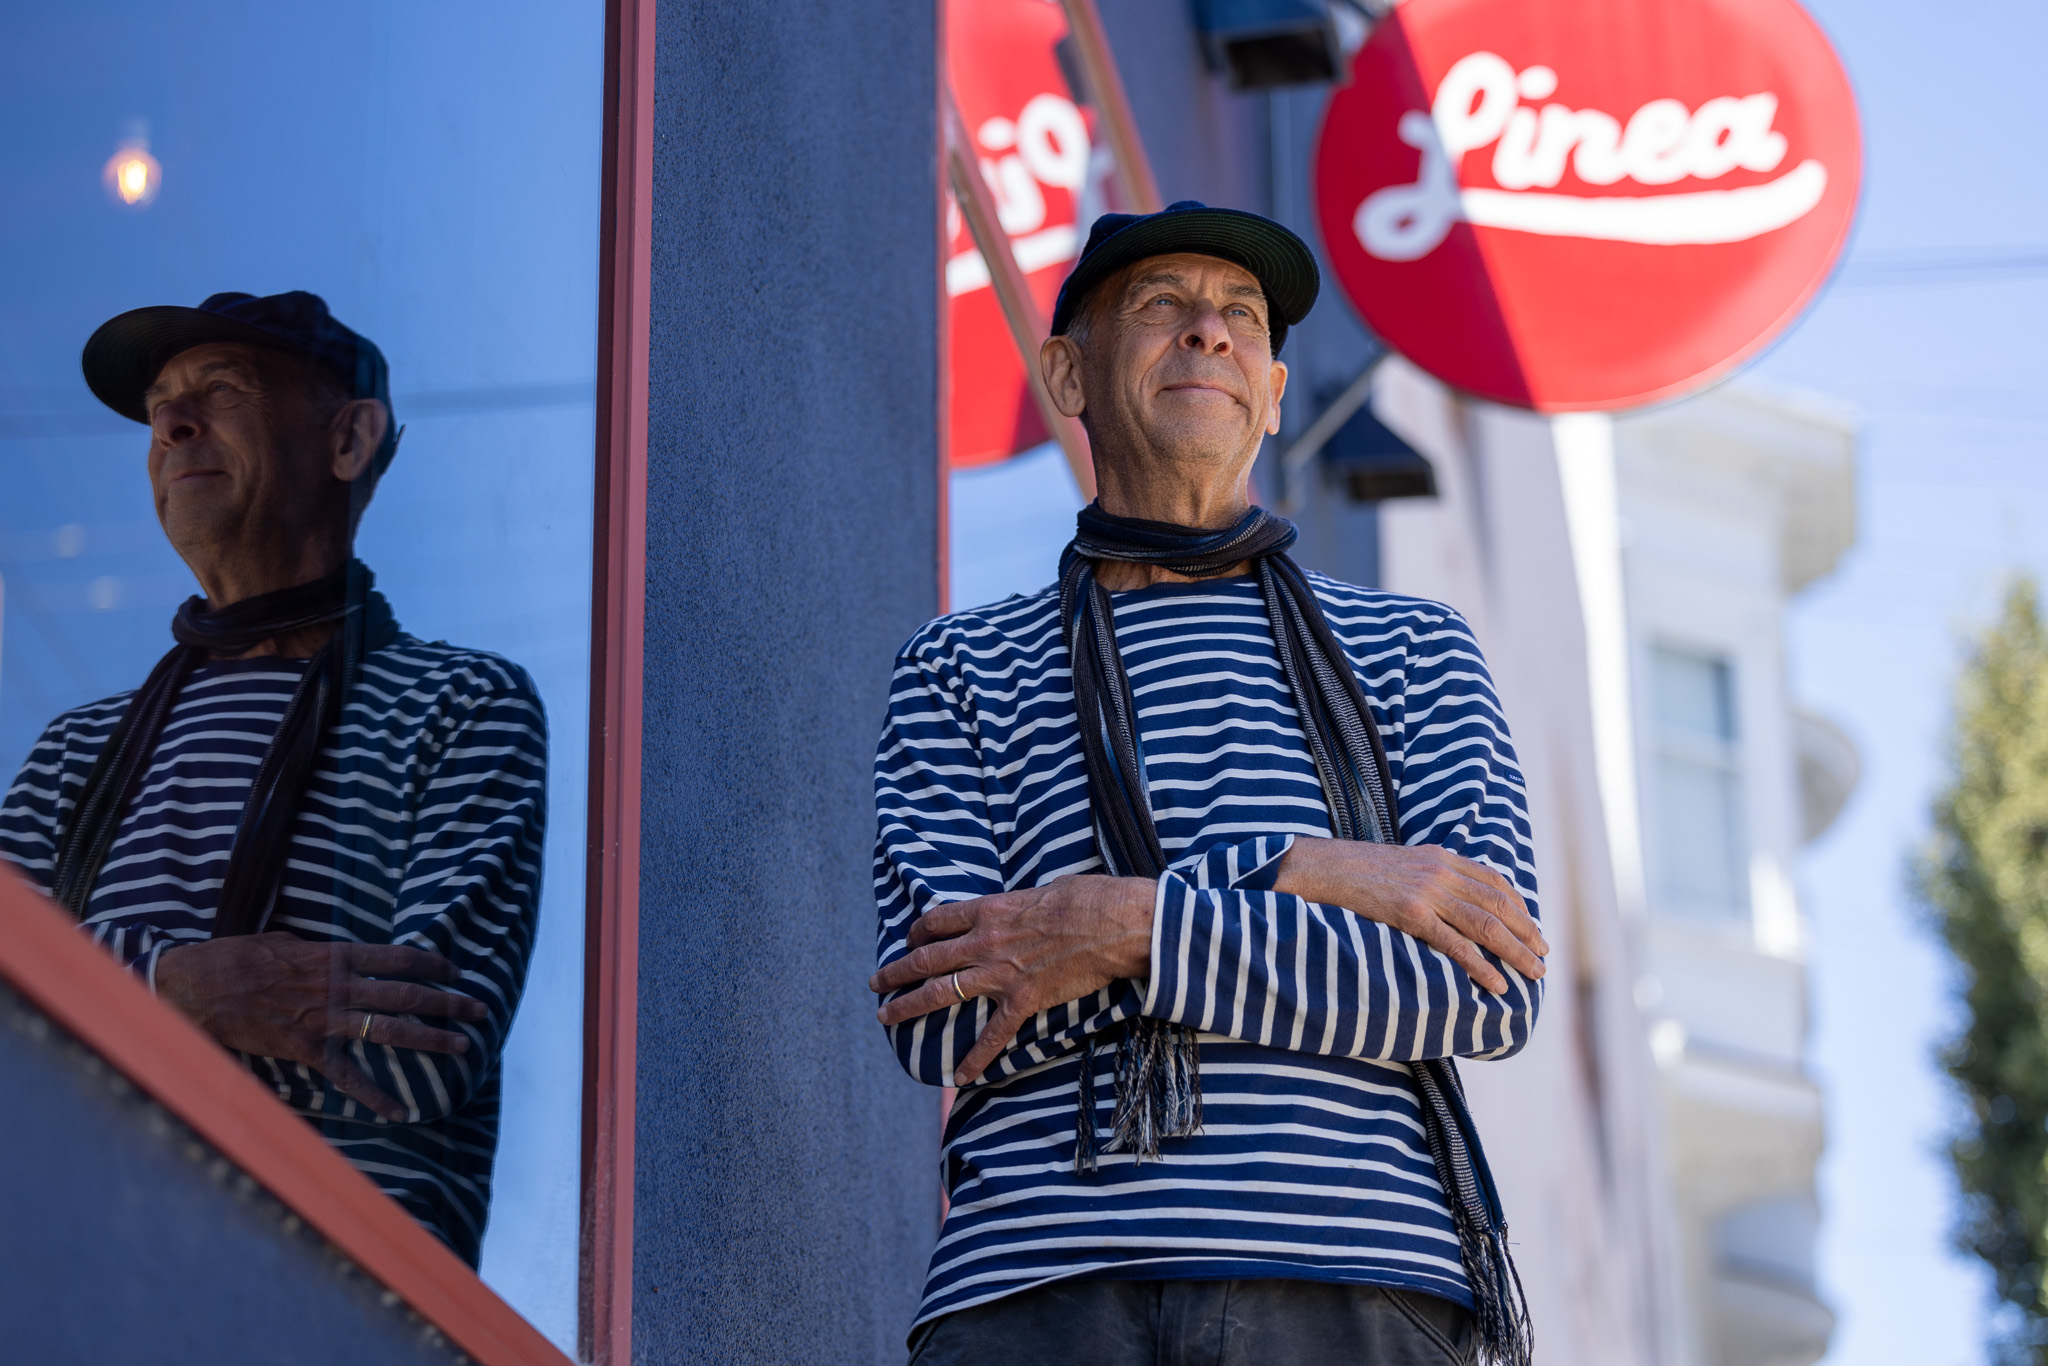 A man in a hat stands near a sign that says Linea, with his reflection in a window next to him.